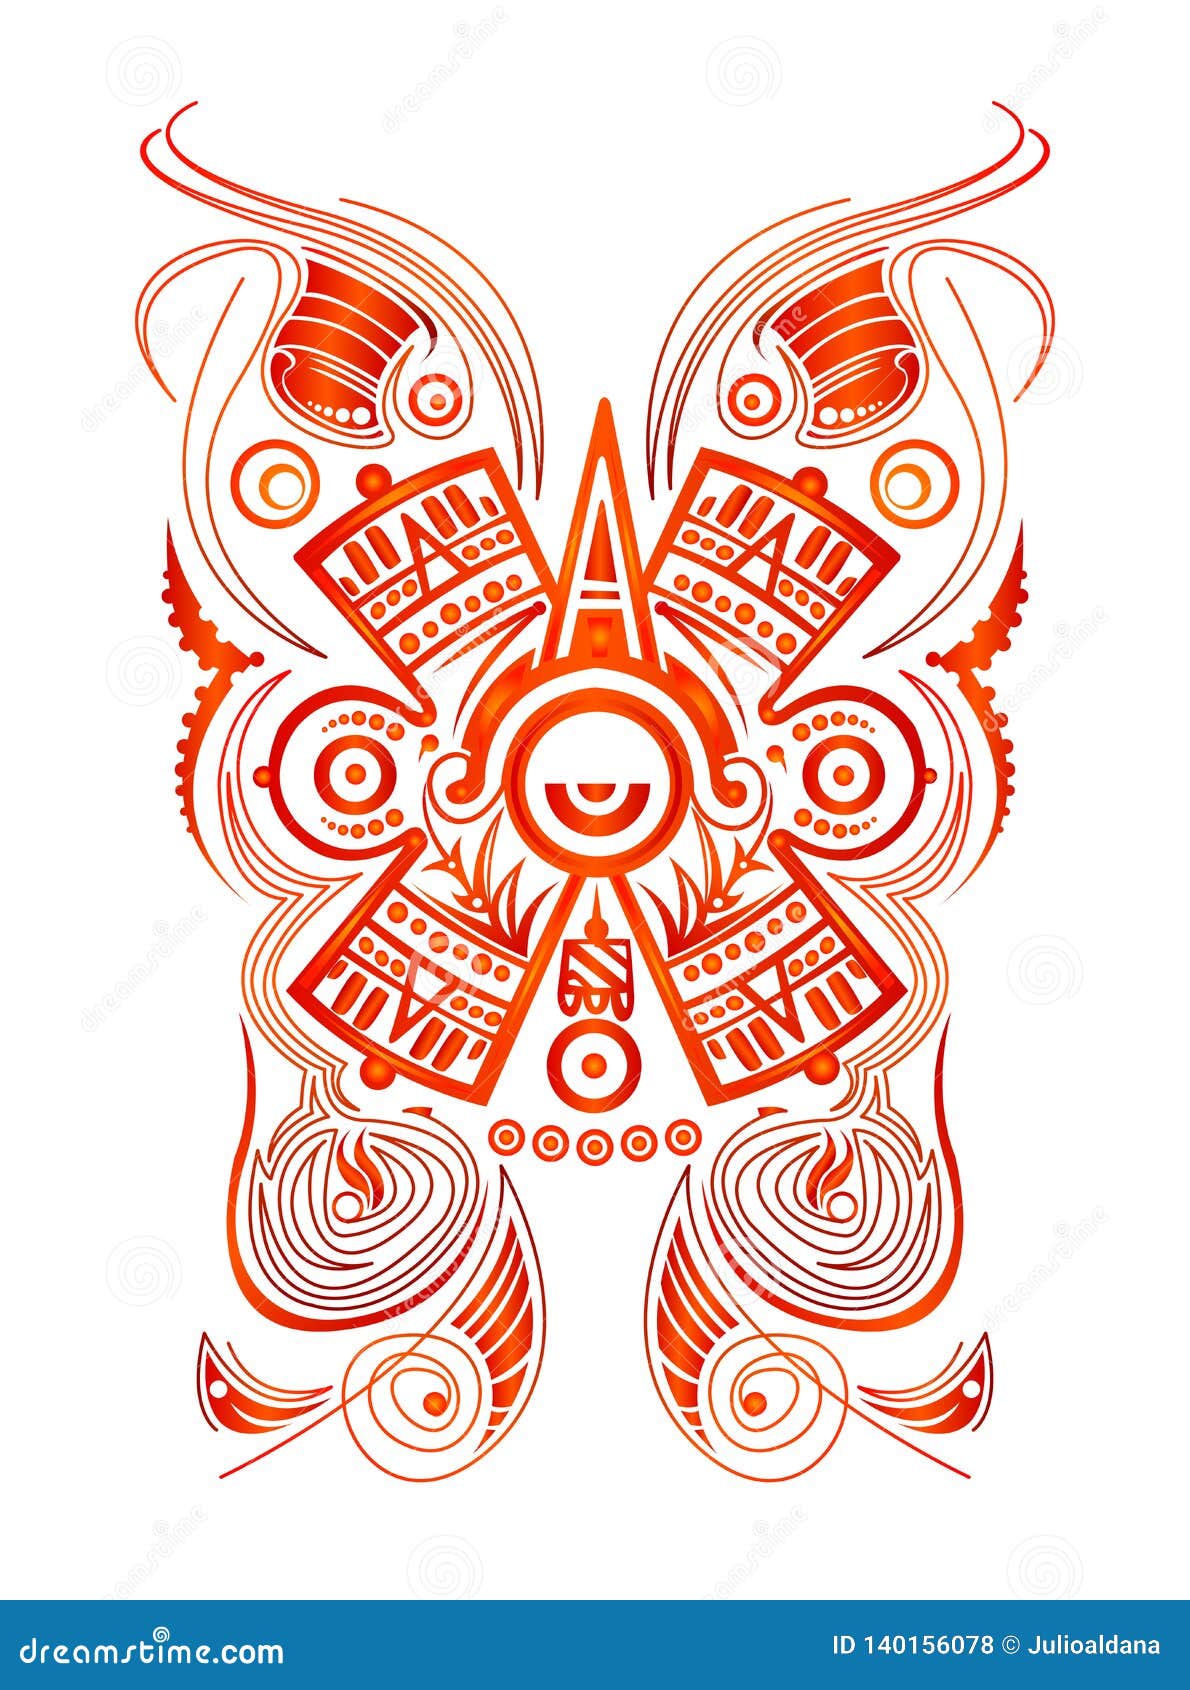 Mayan Aztec Concept Stylized Symbol Vector Illustration, Tattoo Tribal Style Stock Vector - Illustration of exotic, mayan: 140156078